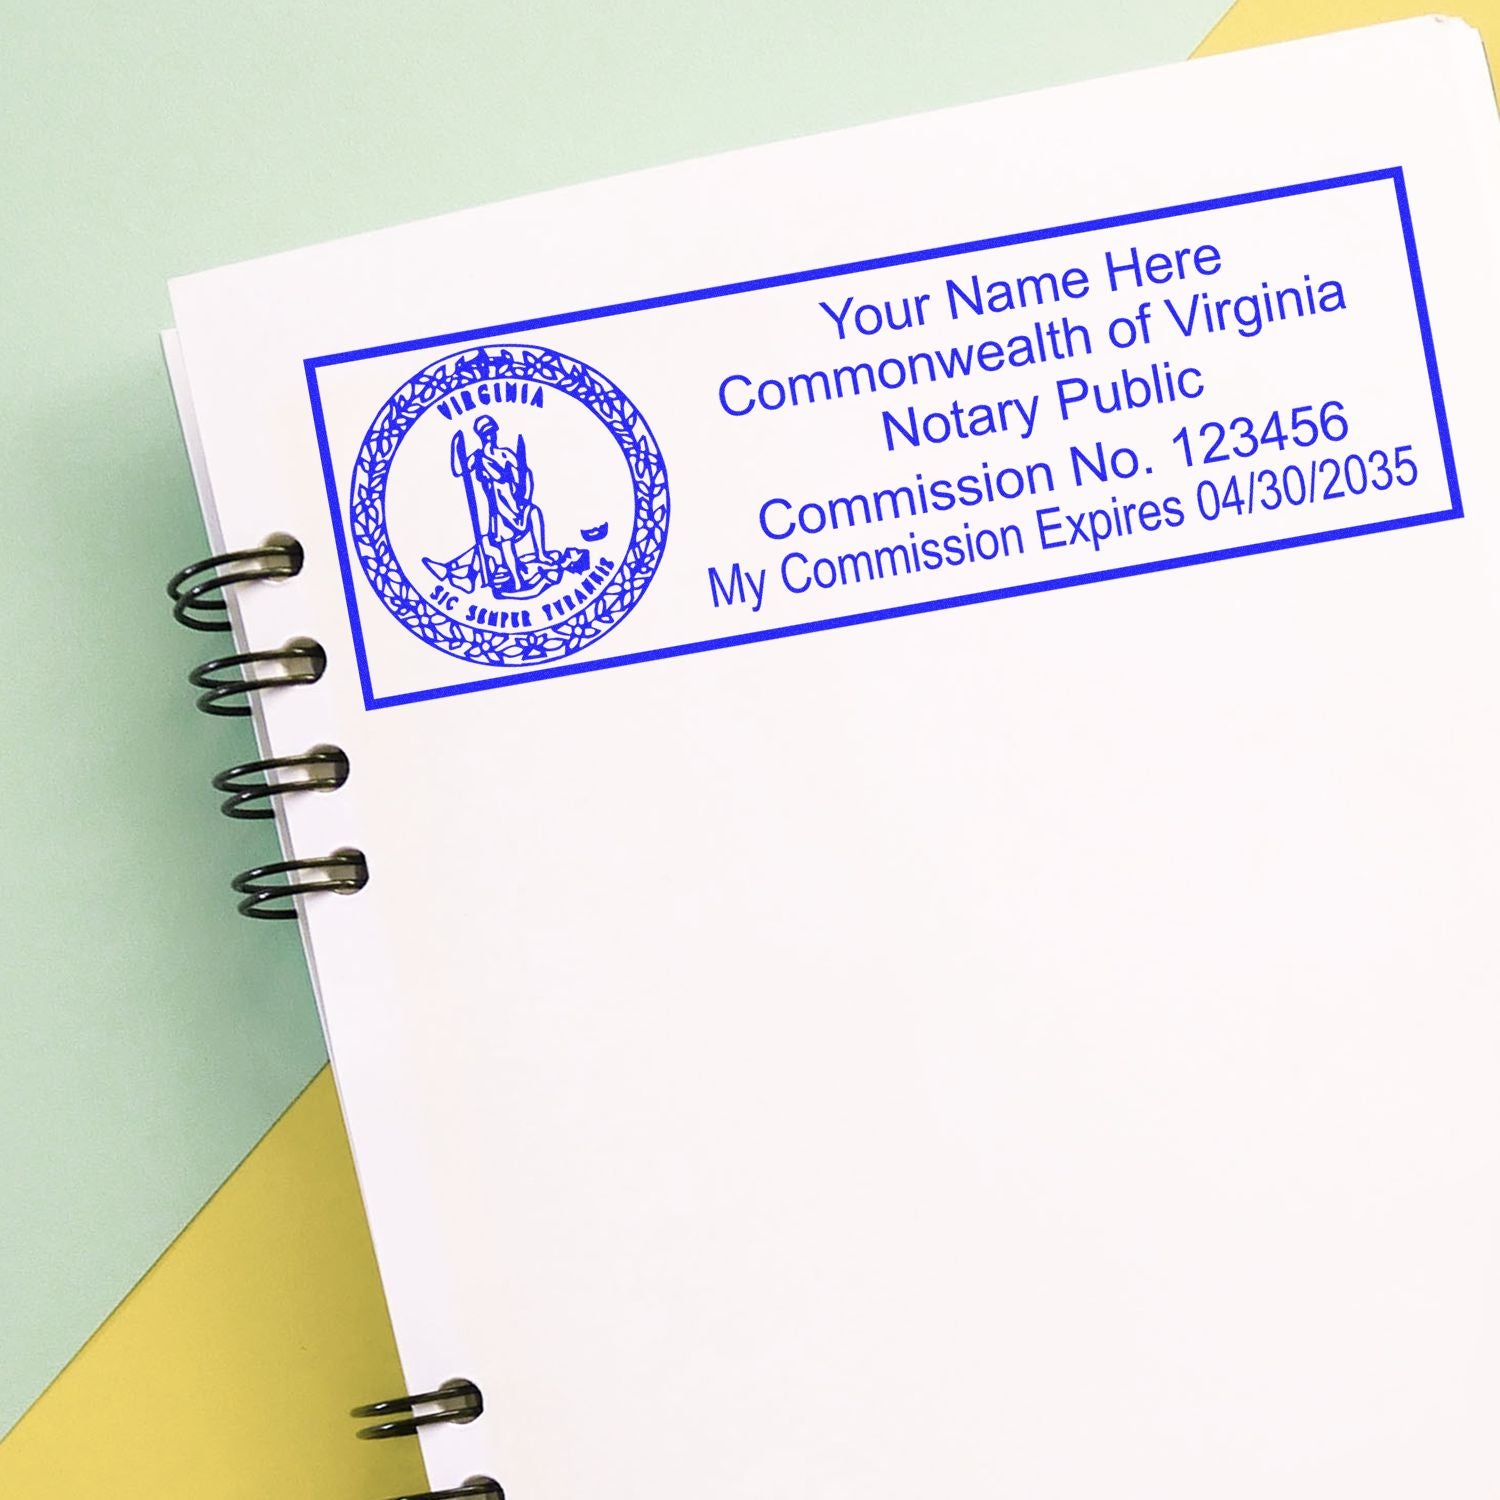 A self-inking stamp with a stamped image showing how your name, commission number, and expiration date with a round Virginia seal image on the left will appear after stamping from this notary stamp.